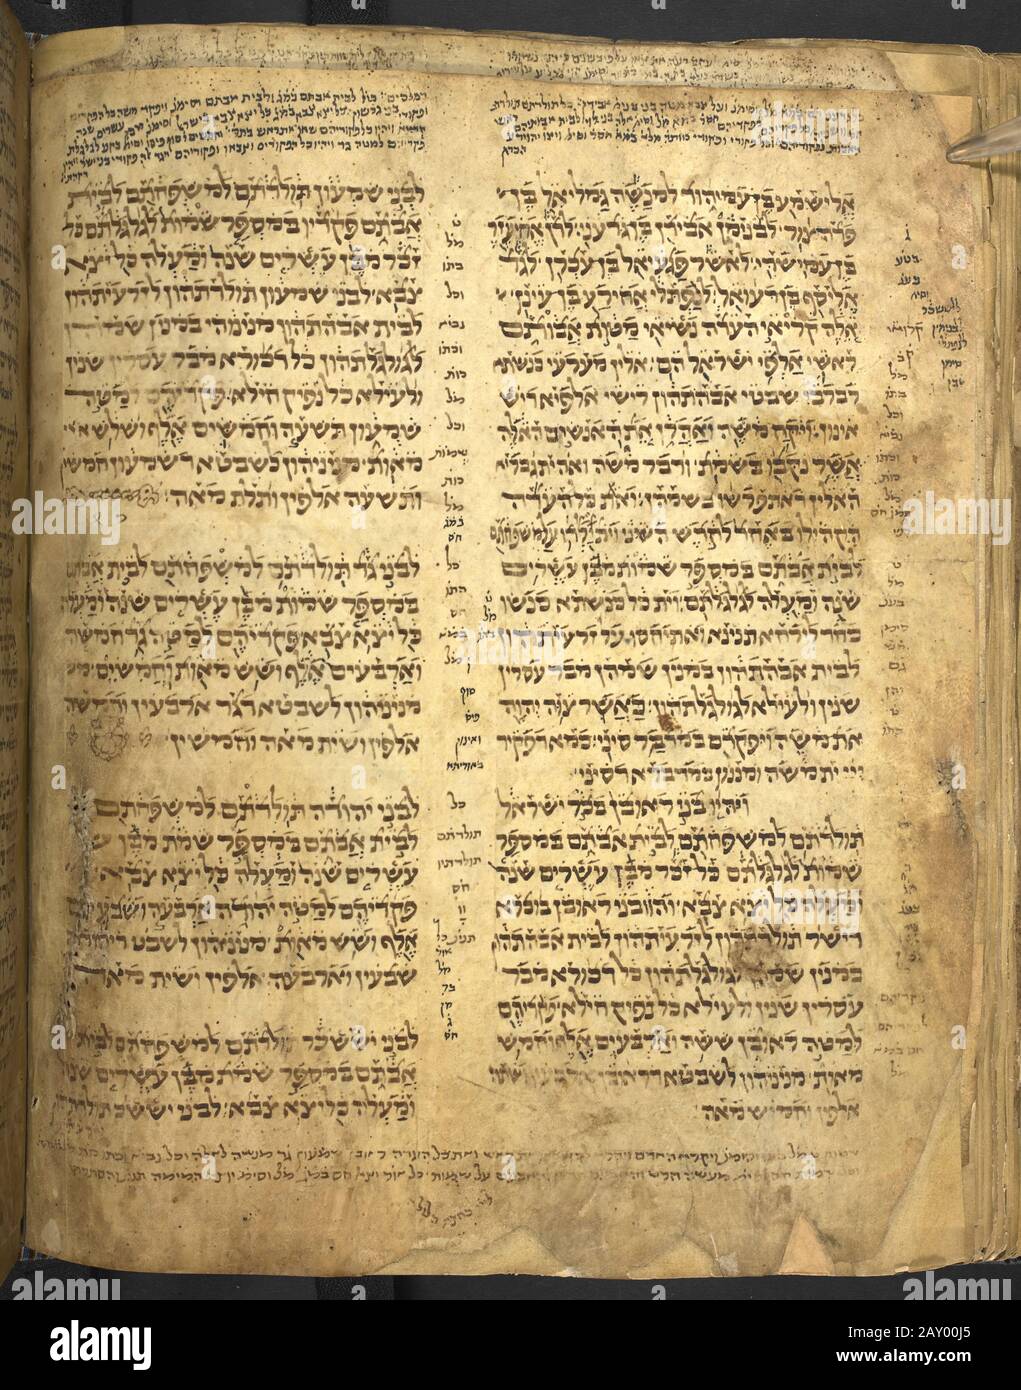 A Torah page from an ancient 12th century Torah with Targum Onkelos, verse-by-verse. Both are vocalized with simple superlinear (Babylonian) punctuation, but Tiberian vocalization has also been added in parts. This is an early example (11th-12th century) of the Torah with Onkelos according to the tradition of the Jews of Yemen. Stock Photo